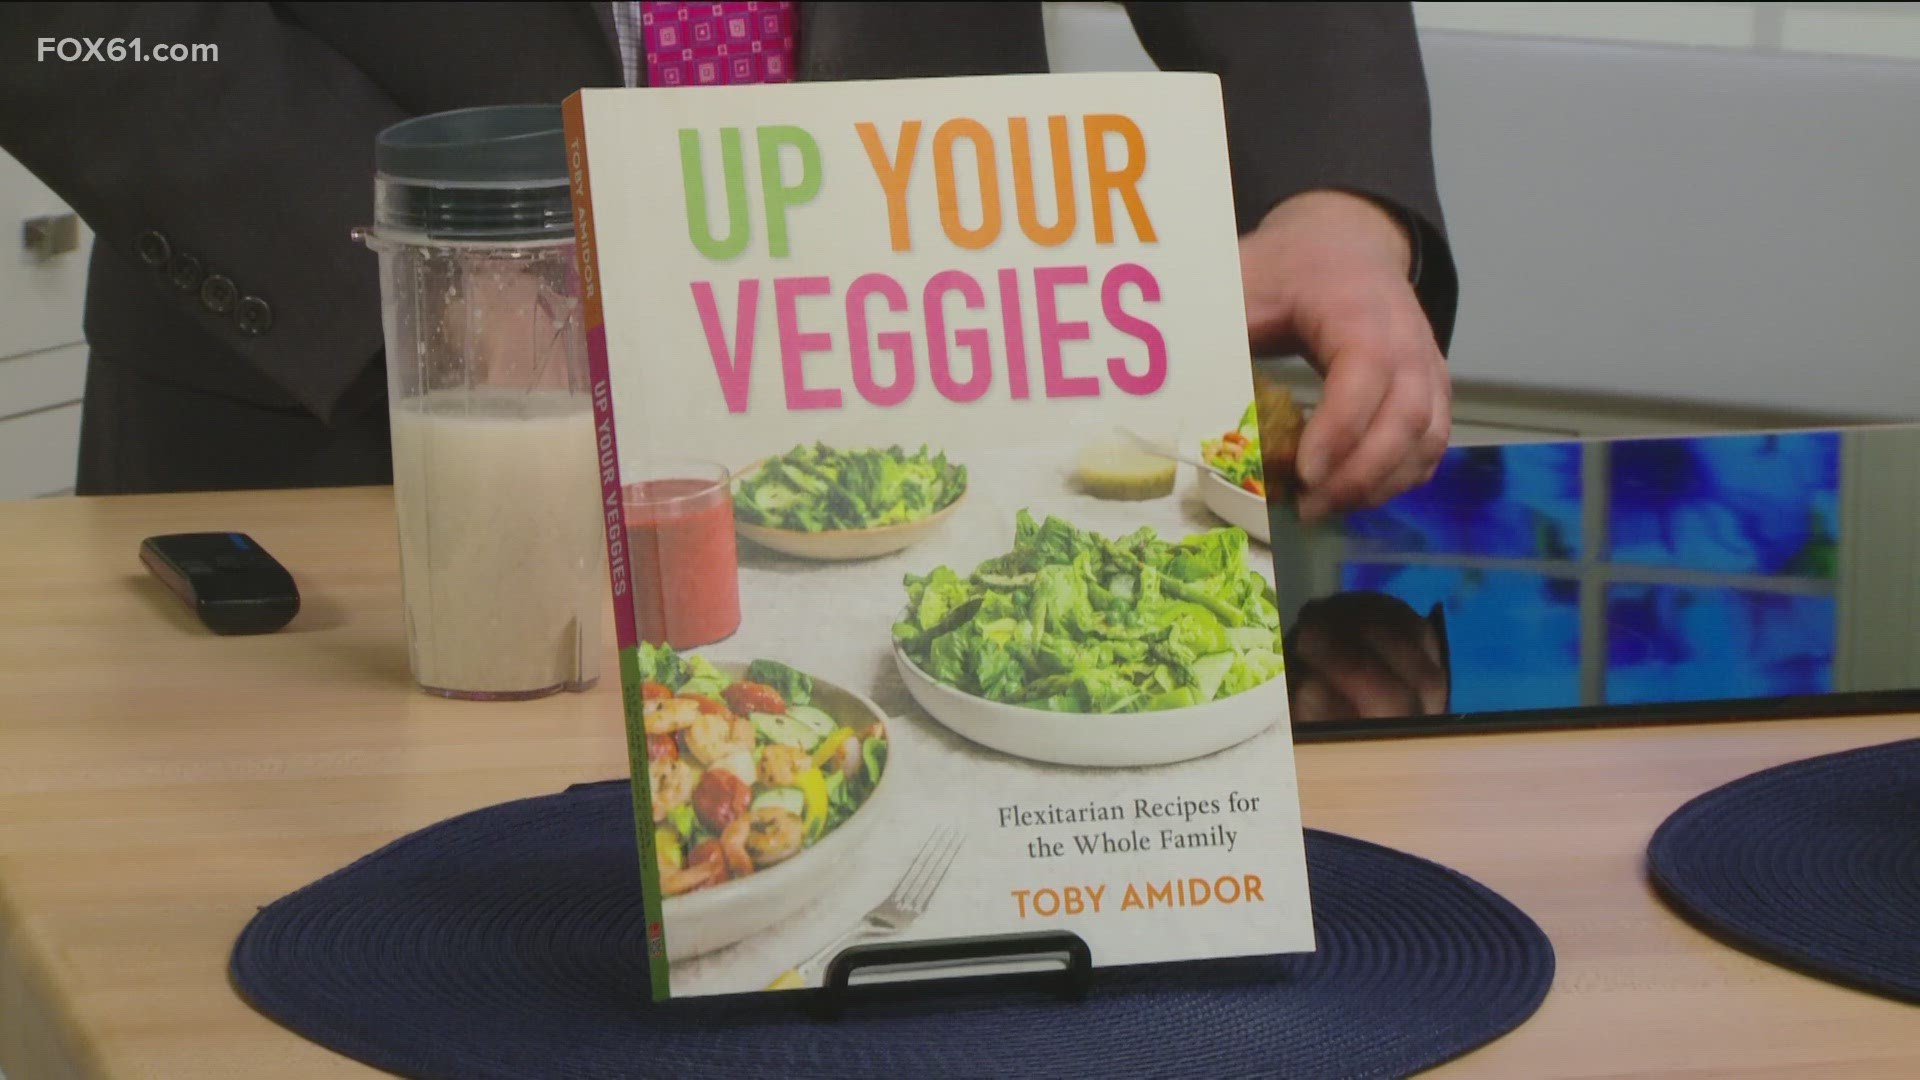 Dietician Toby Amidor looks into a weight-loss trend on social media that promises 40 pounds gone in 2 months. Does it work?